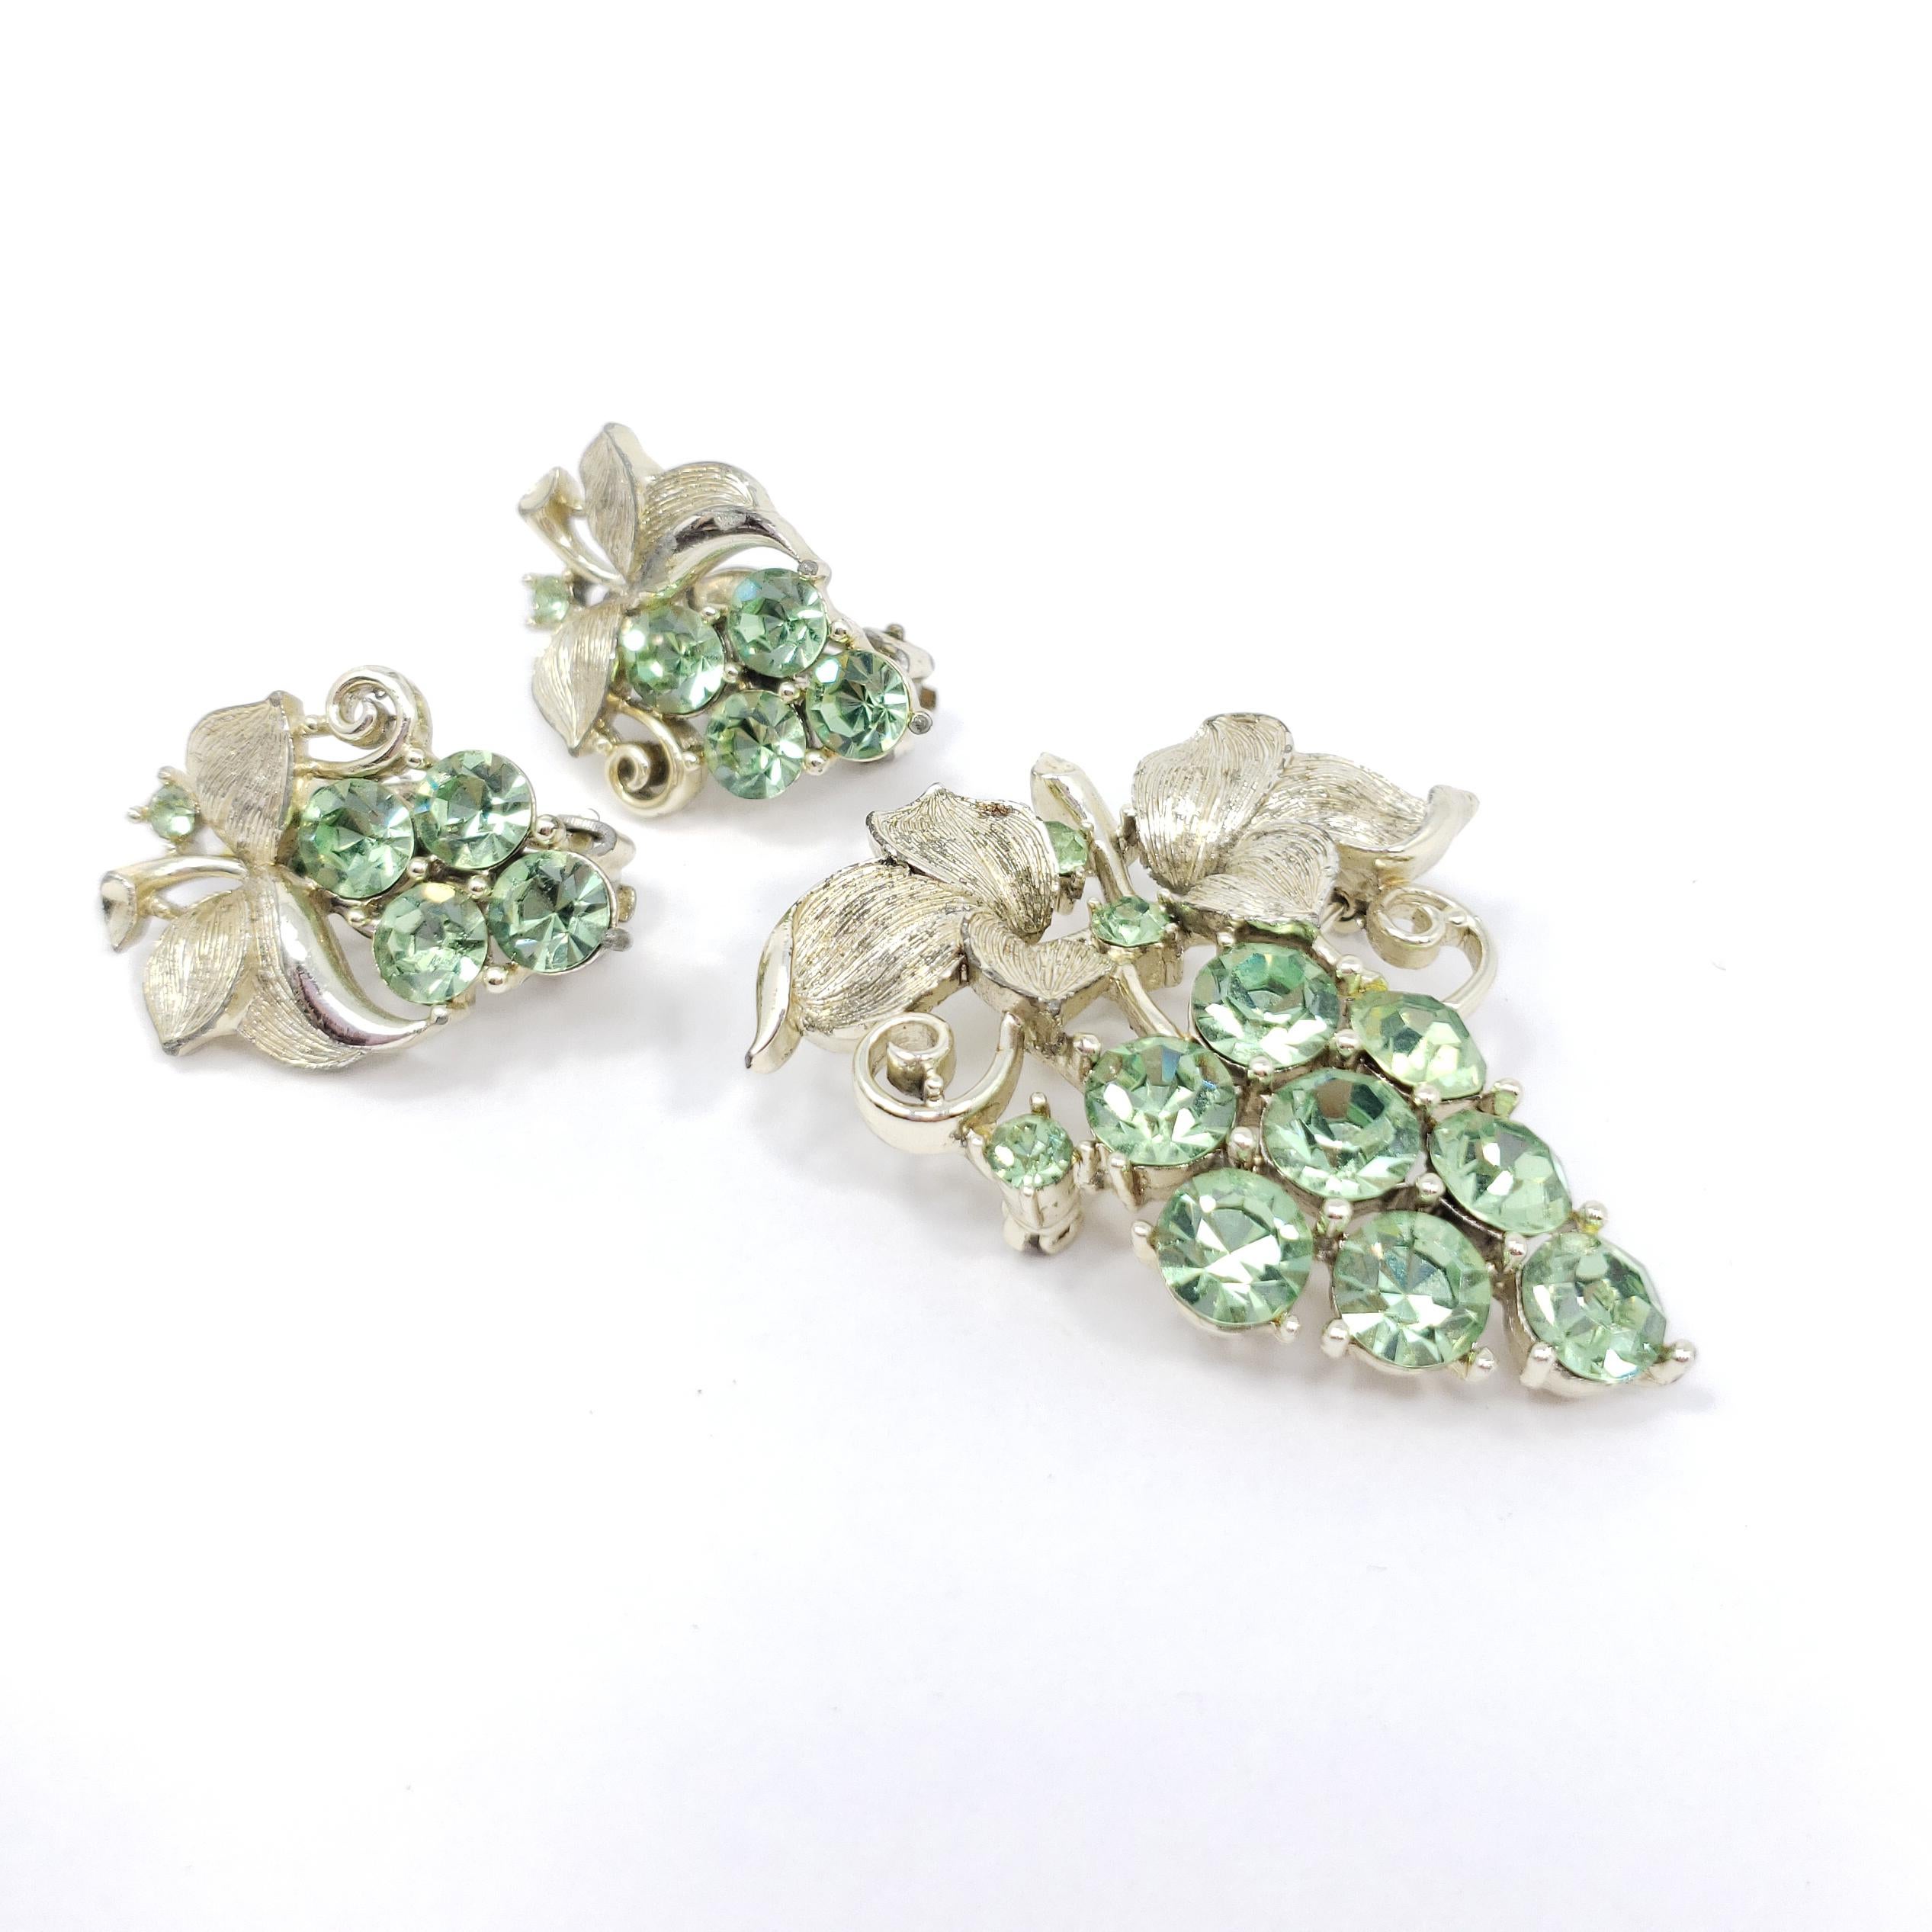 A sophisticated set from Lisner, featuring white gold-tone leaves with peridot green fruit clusters. Includes a single pin brooch and a pair of clip-on earrings.

Gold-tone. Vintage, 20th century.

Brooch dimensions: 2